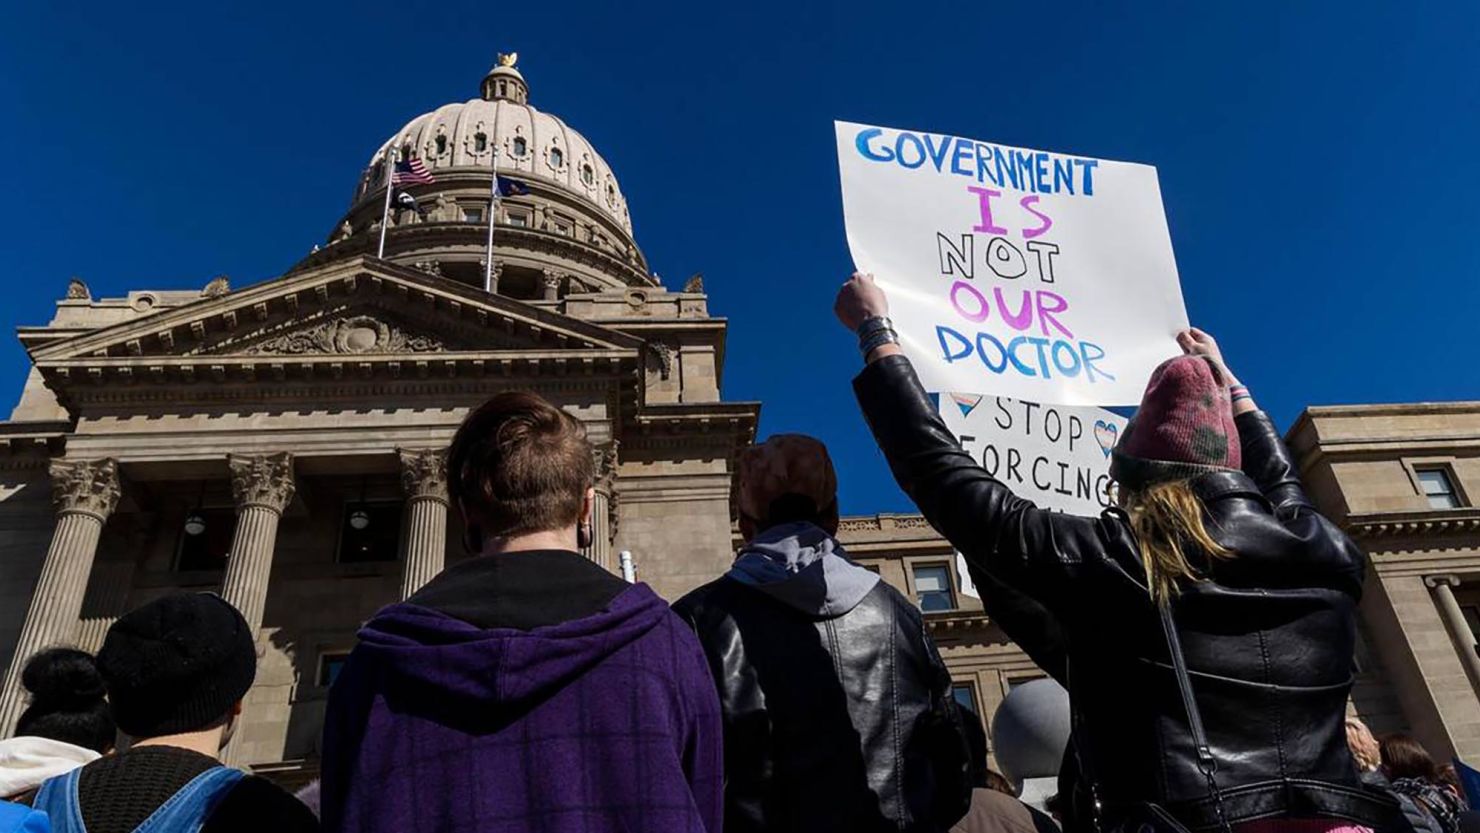 More than 300 people gather in front of the Idaho Capitol to oppose anti-transgender legislation moving through the Legislature in February 2023 in Boise. (Darin Oswald/Idaho Statesman/Tribune News Service via Getty Images)